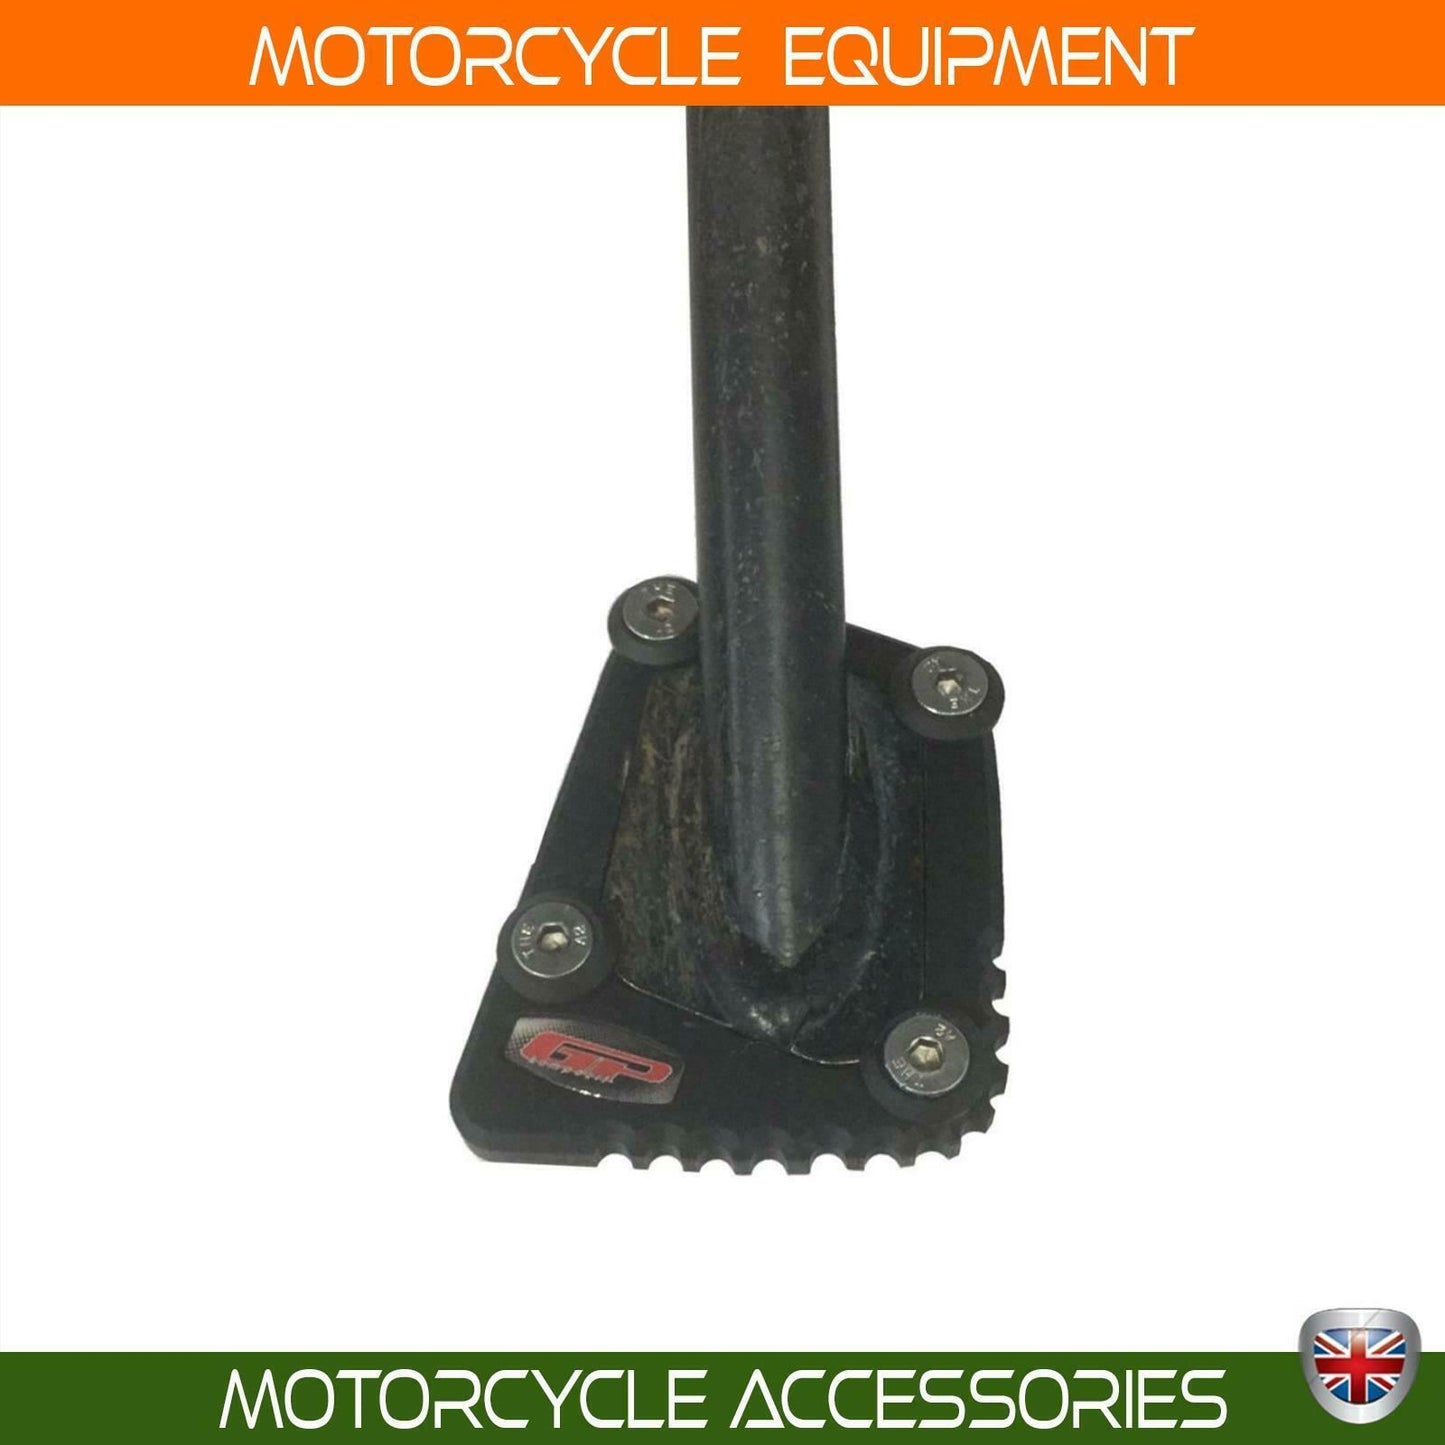 Bmw R 1200 GS ADV side stand enlarger 2004-2012